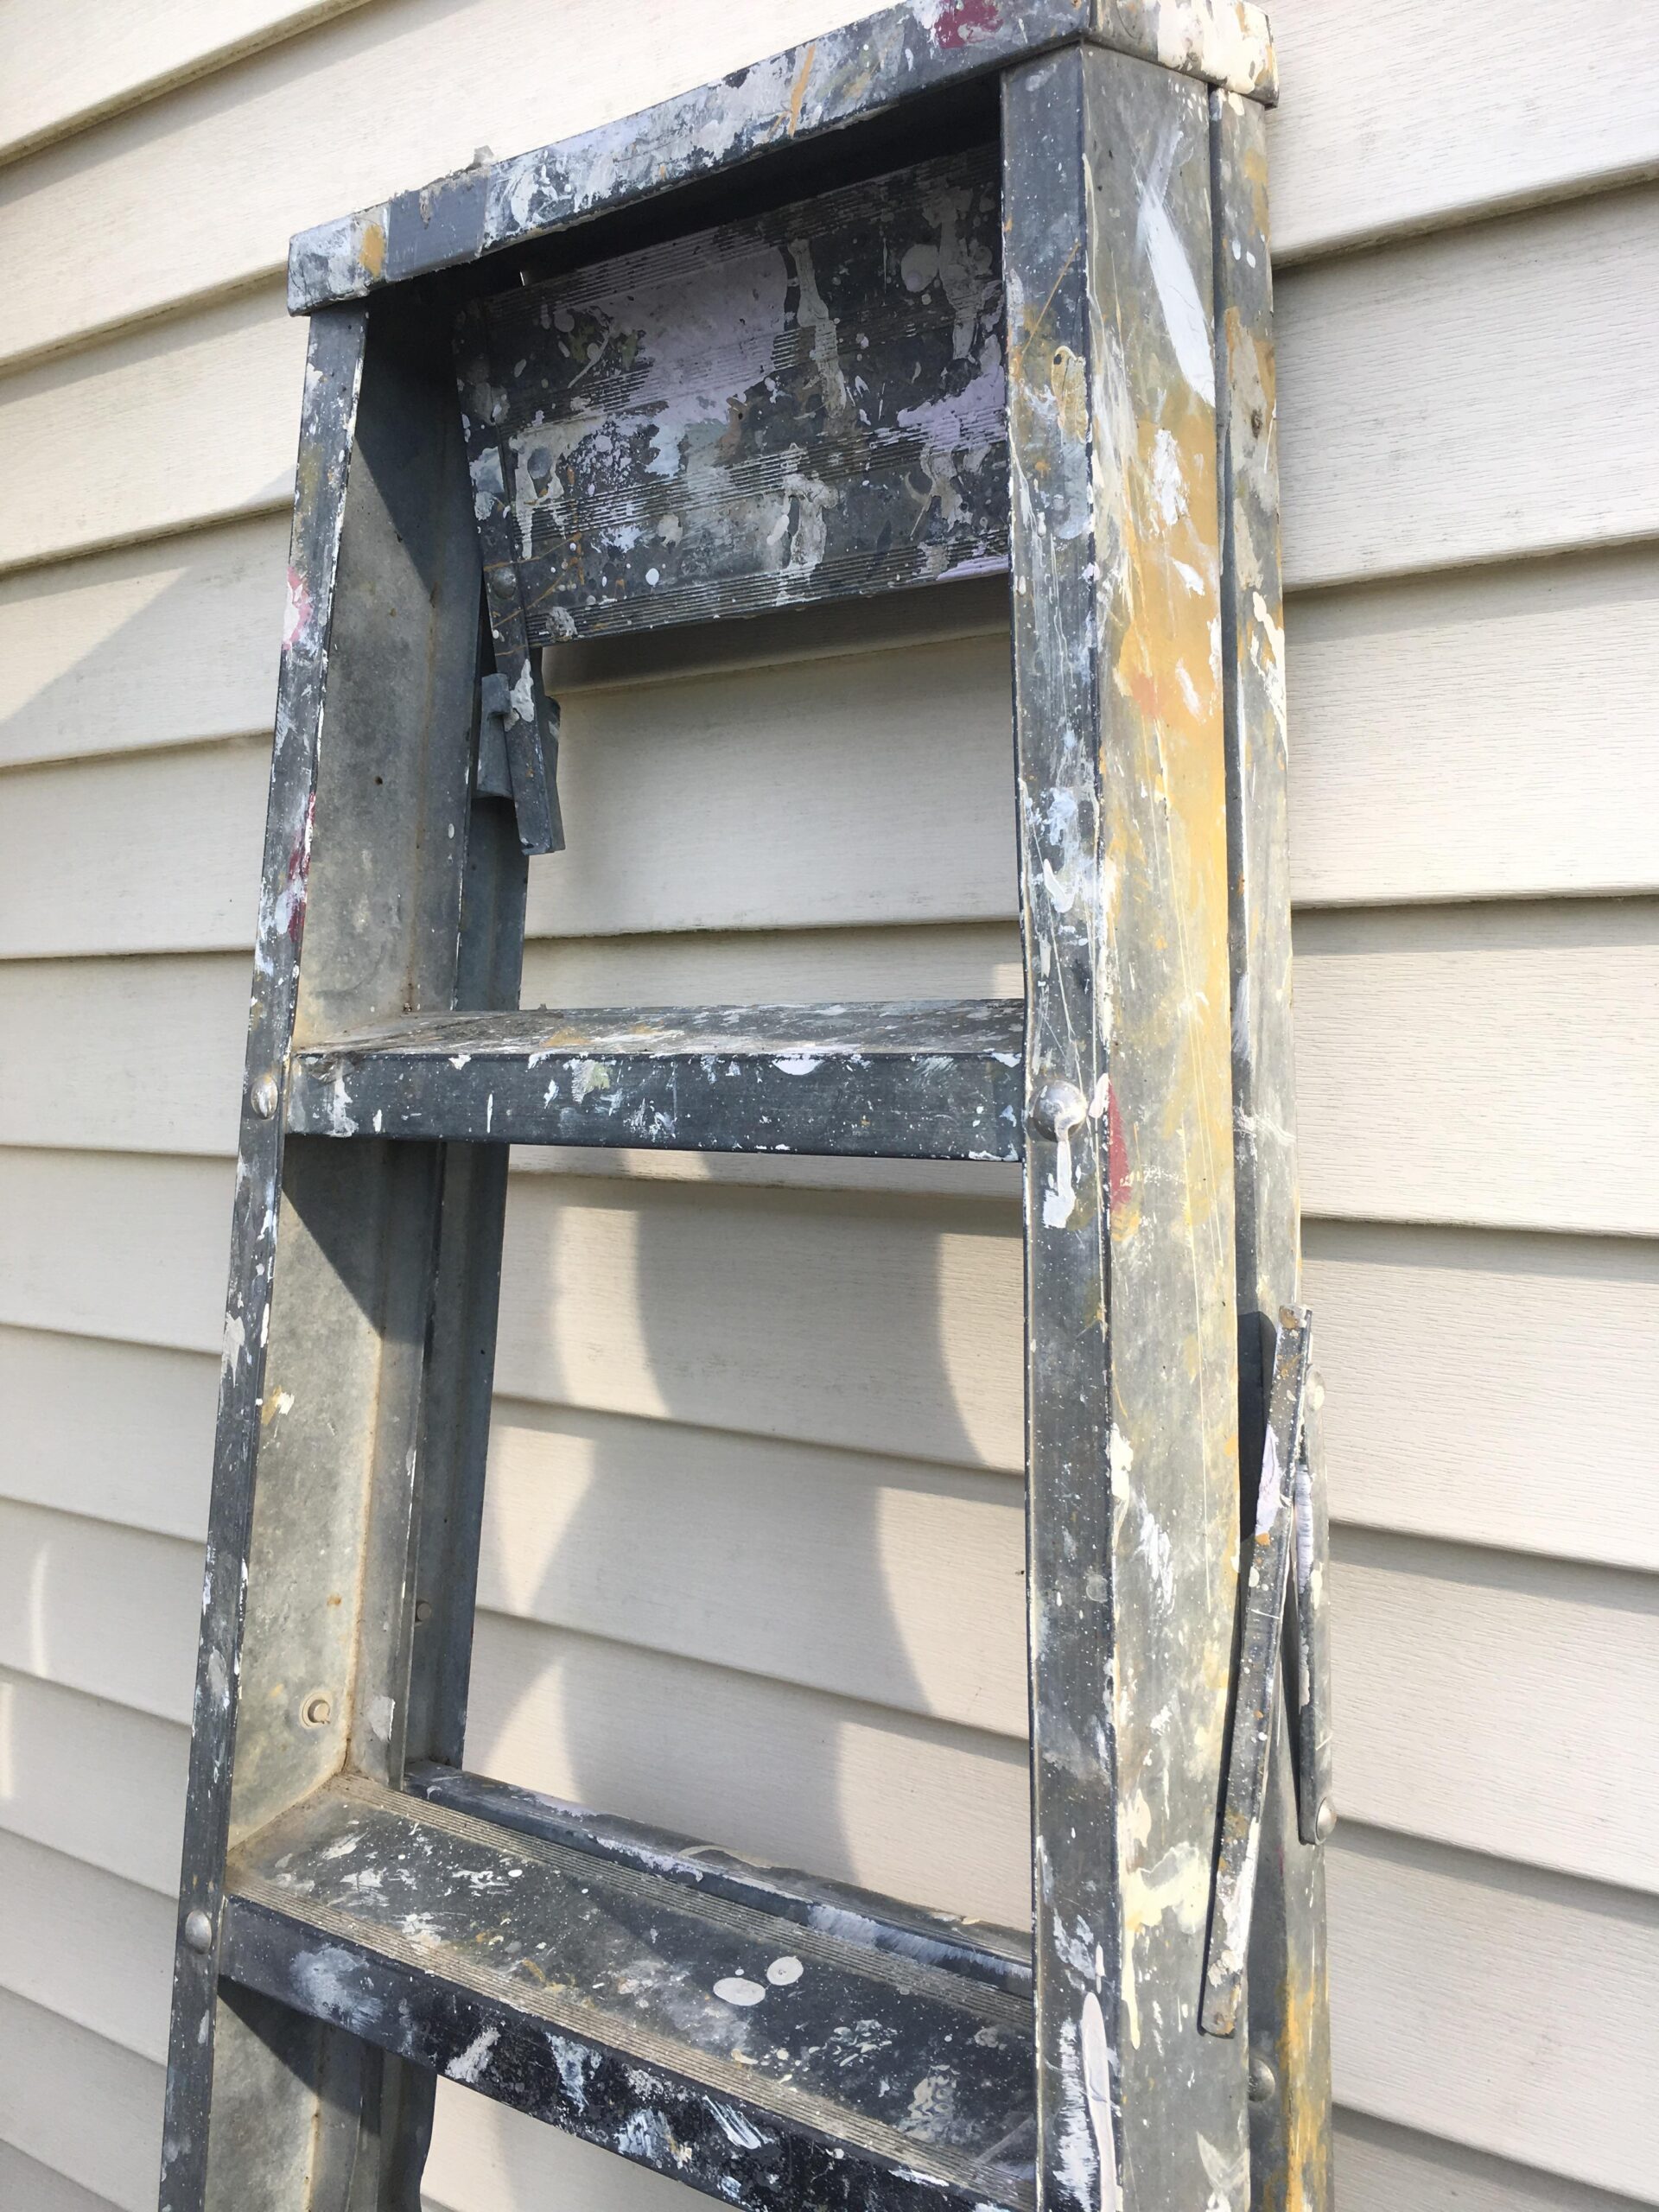 How to Remove Paint from a Ladder